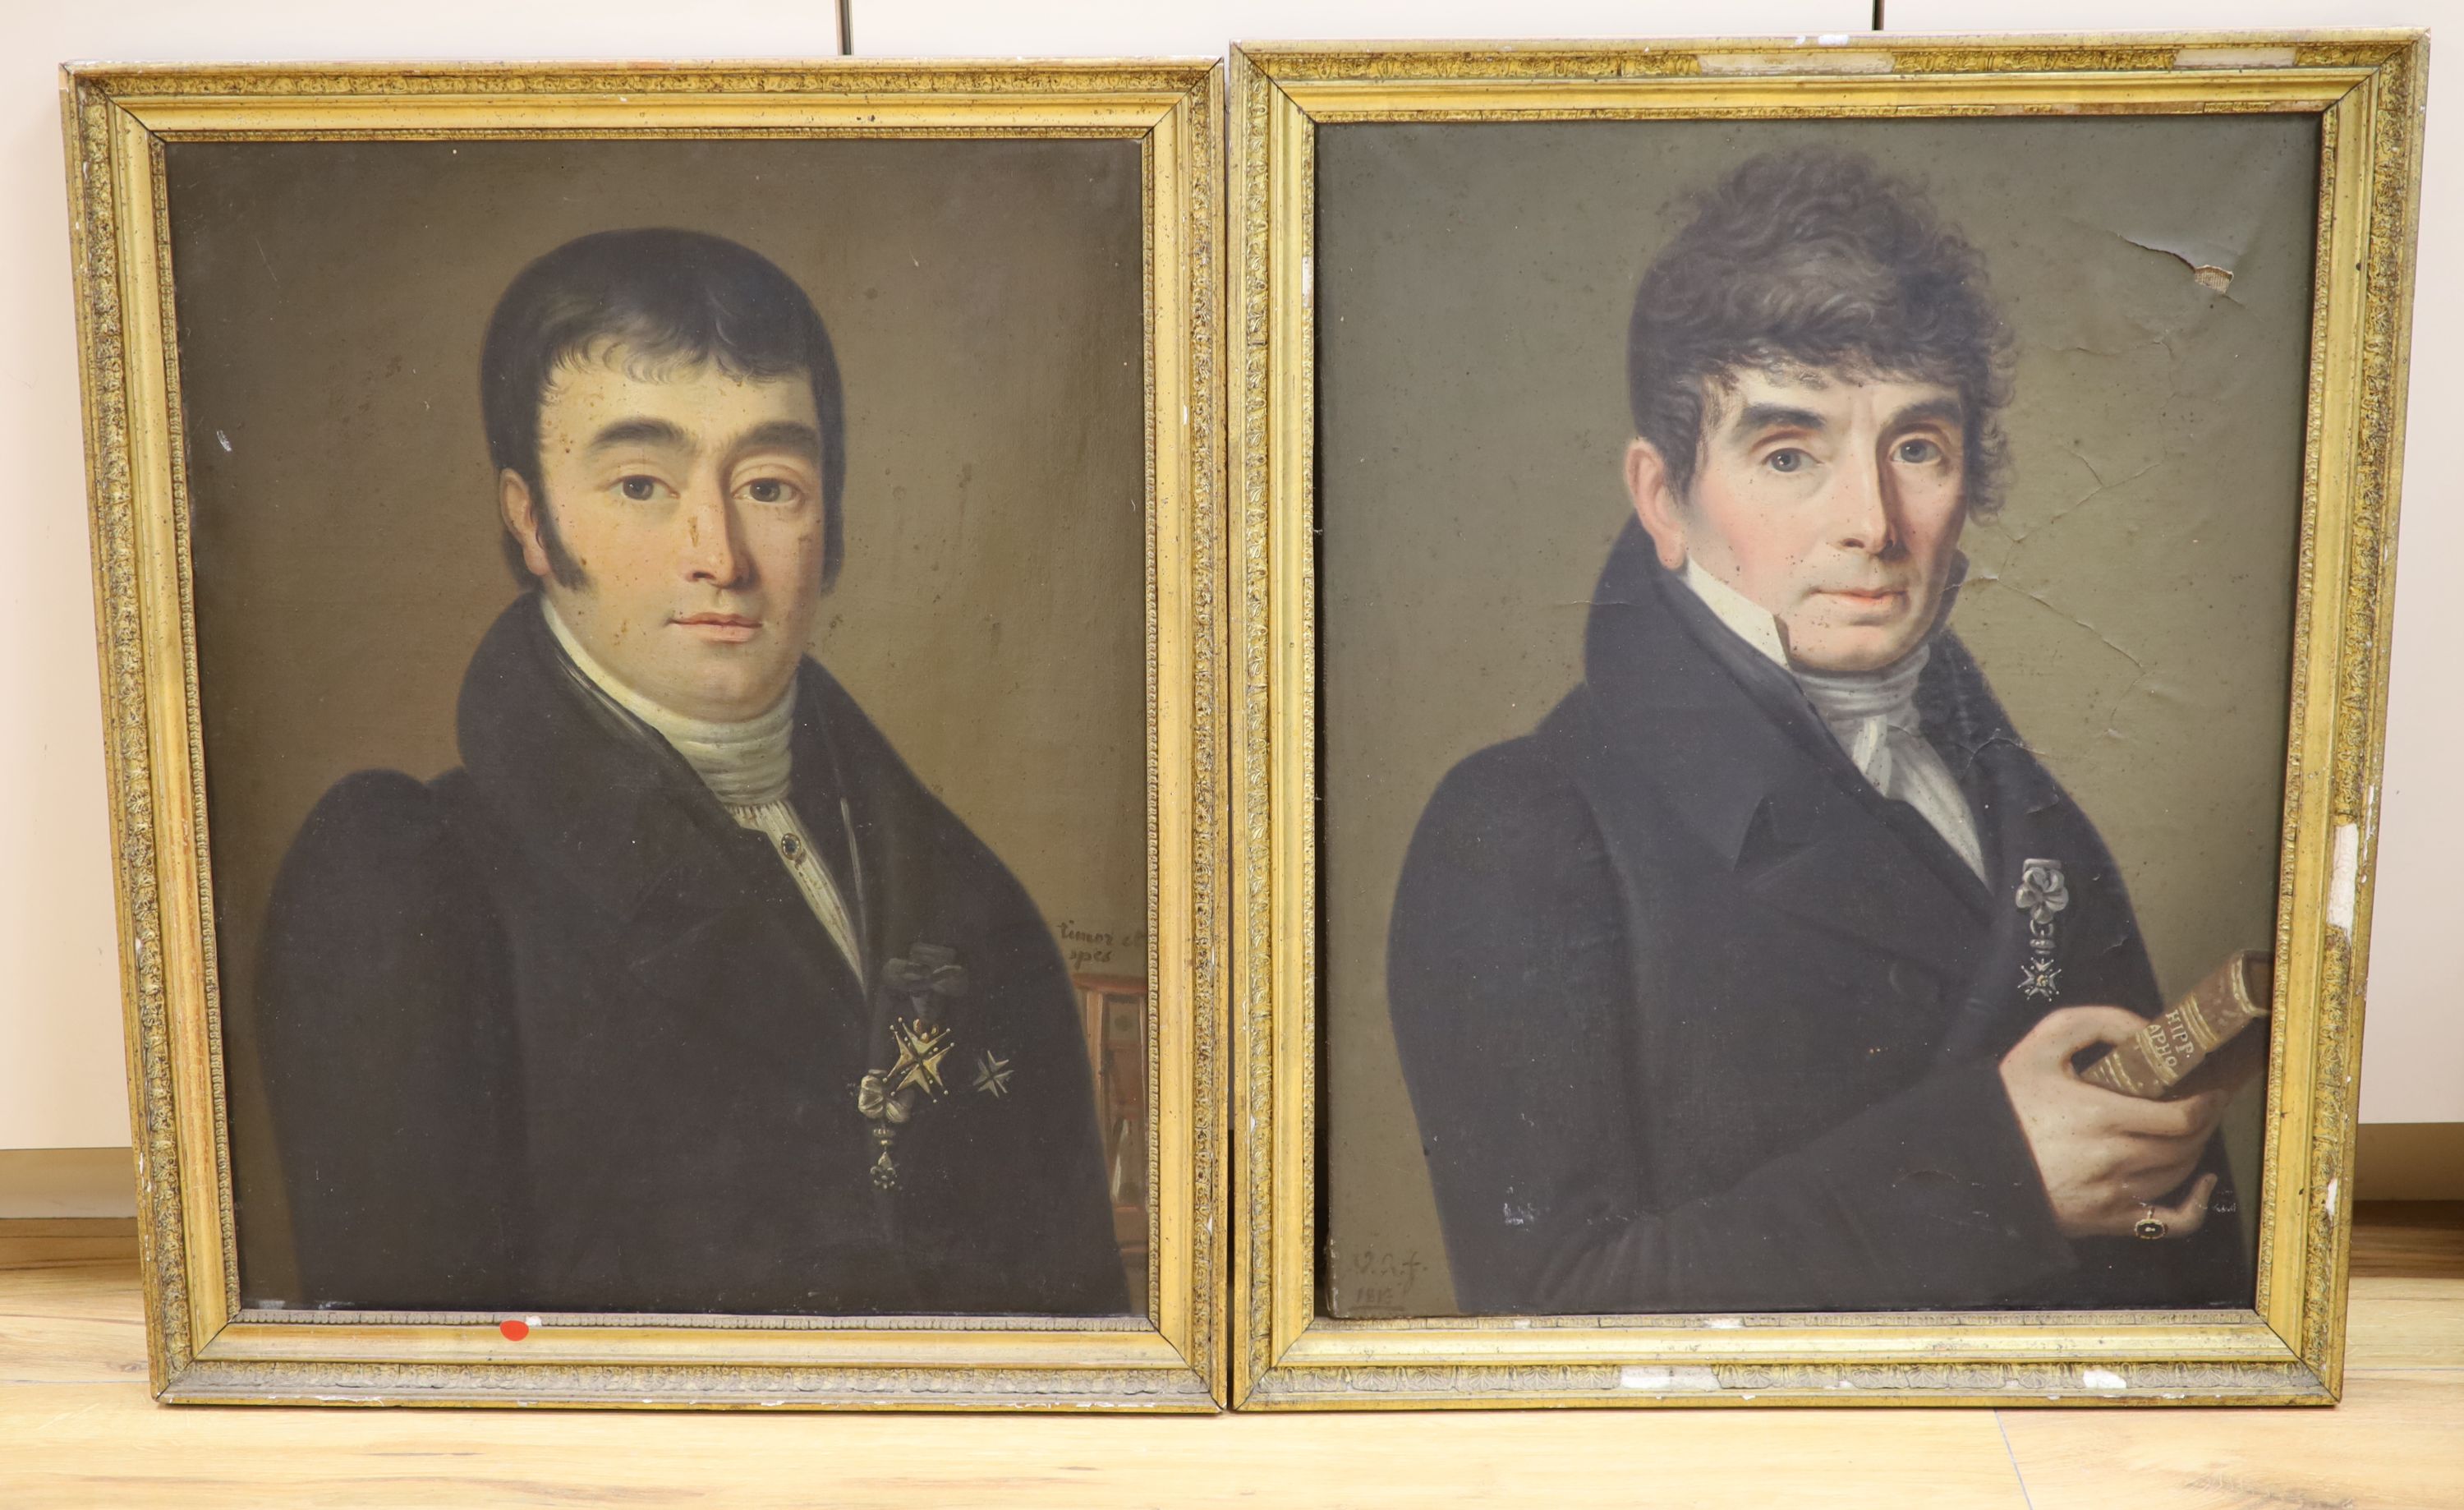 Early 19th century French School, an associated pair of portrait studies of gentleman, each wearing